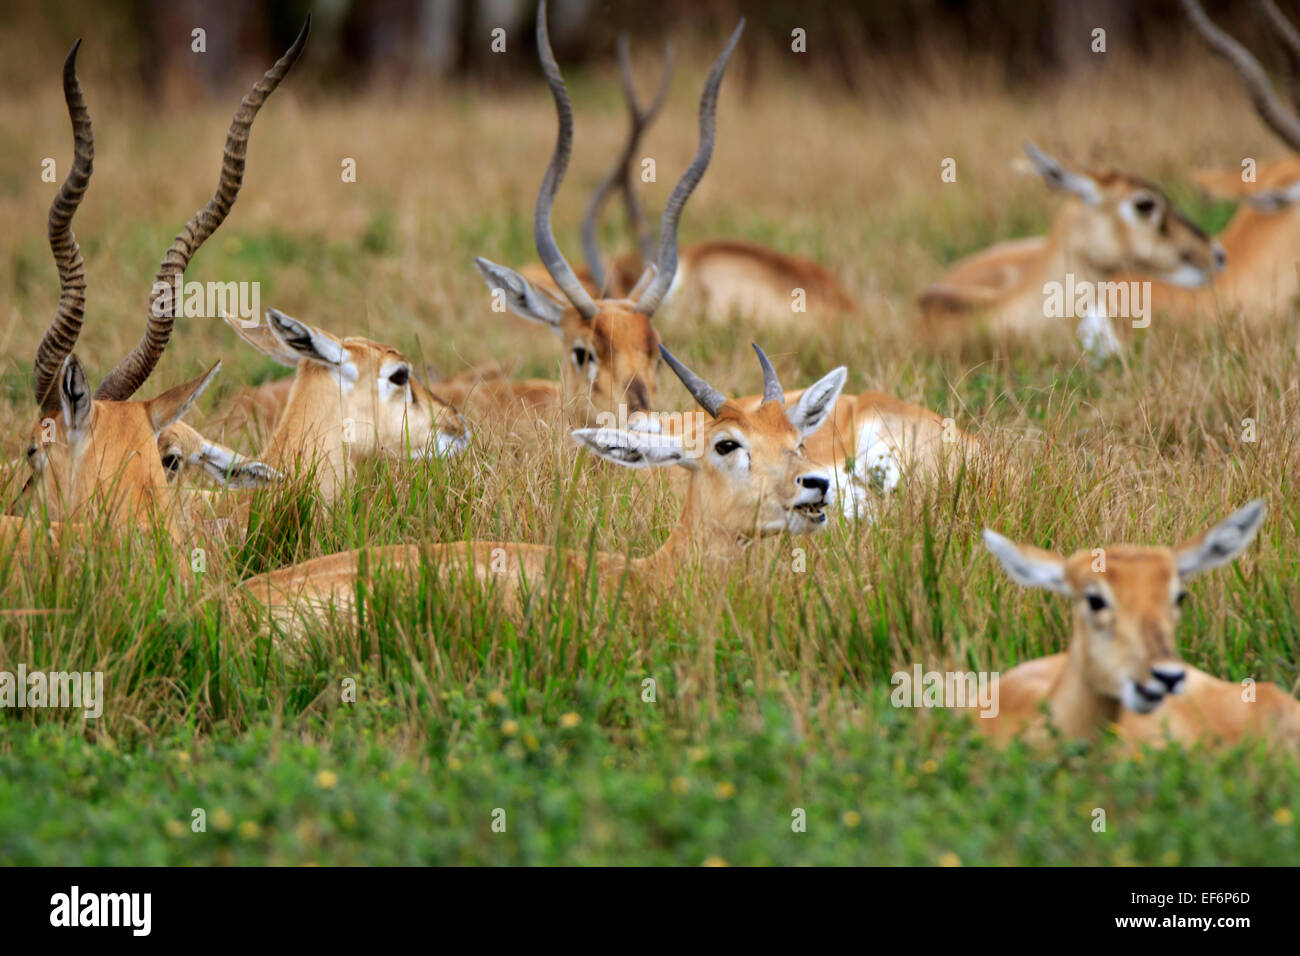 Blackbuck, Antilope cervicapra. Females and young males resting in the grass are camoflaged from casual observation. Stock Photo